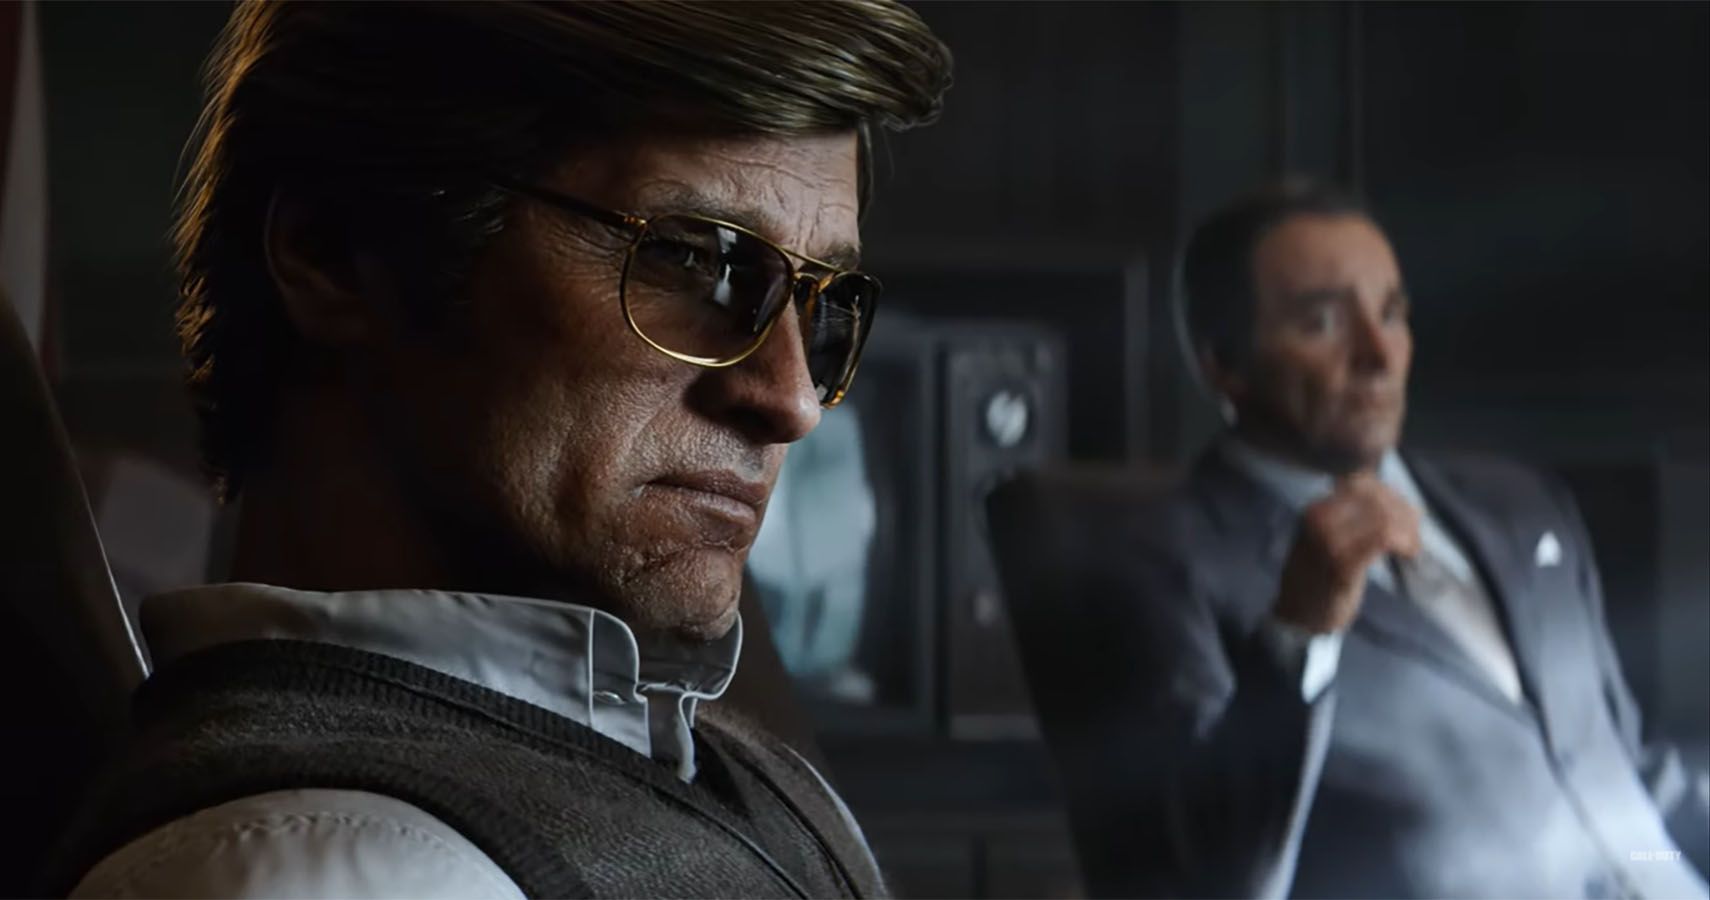 Call of Duty's Russel Adler as pictured in the reveal trailer for Call of Duty: Black Ops - Cold War